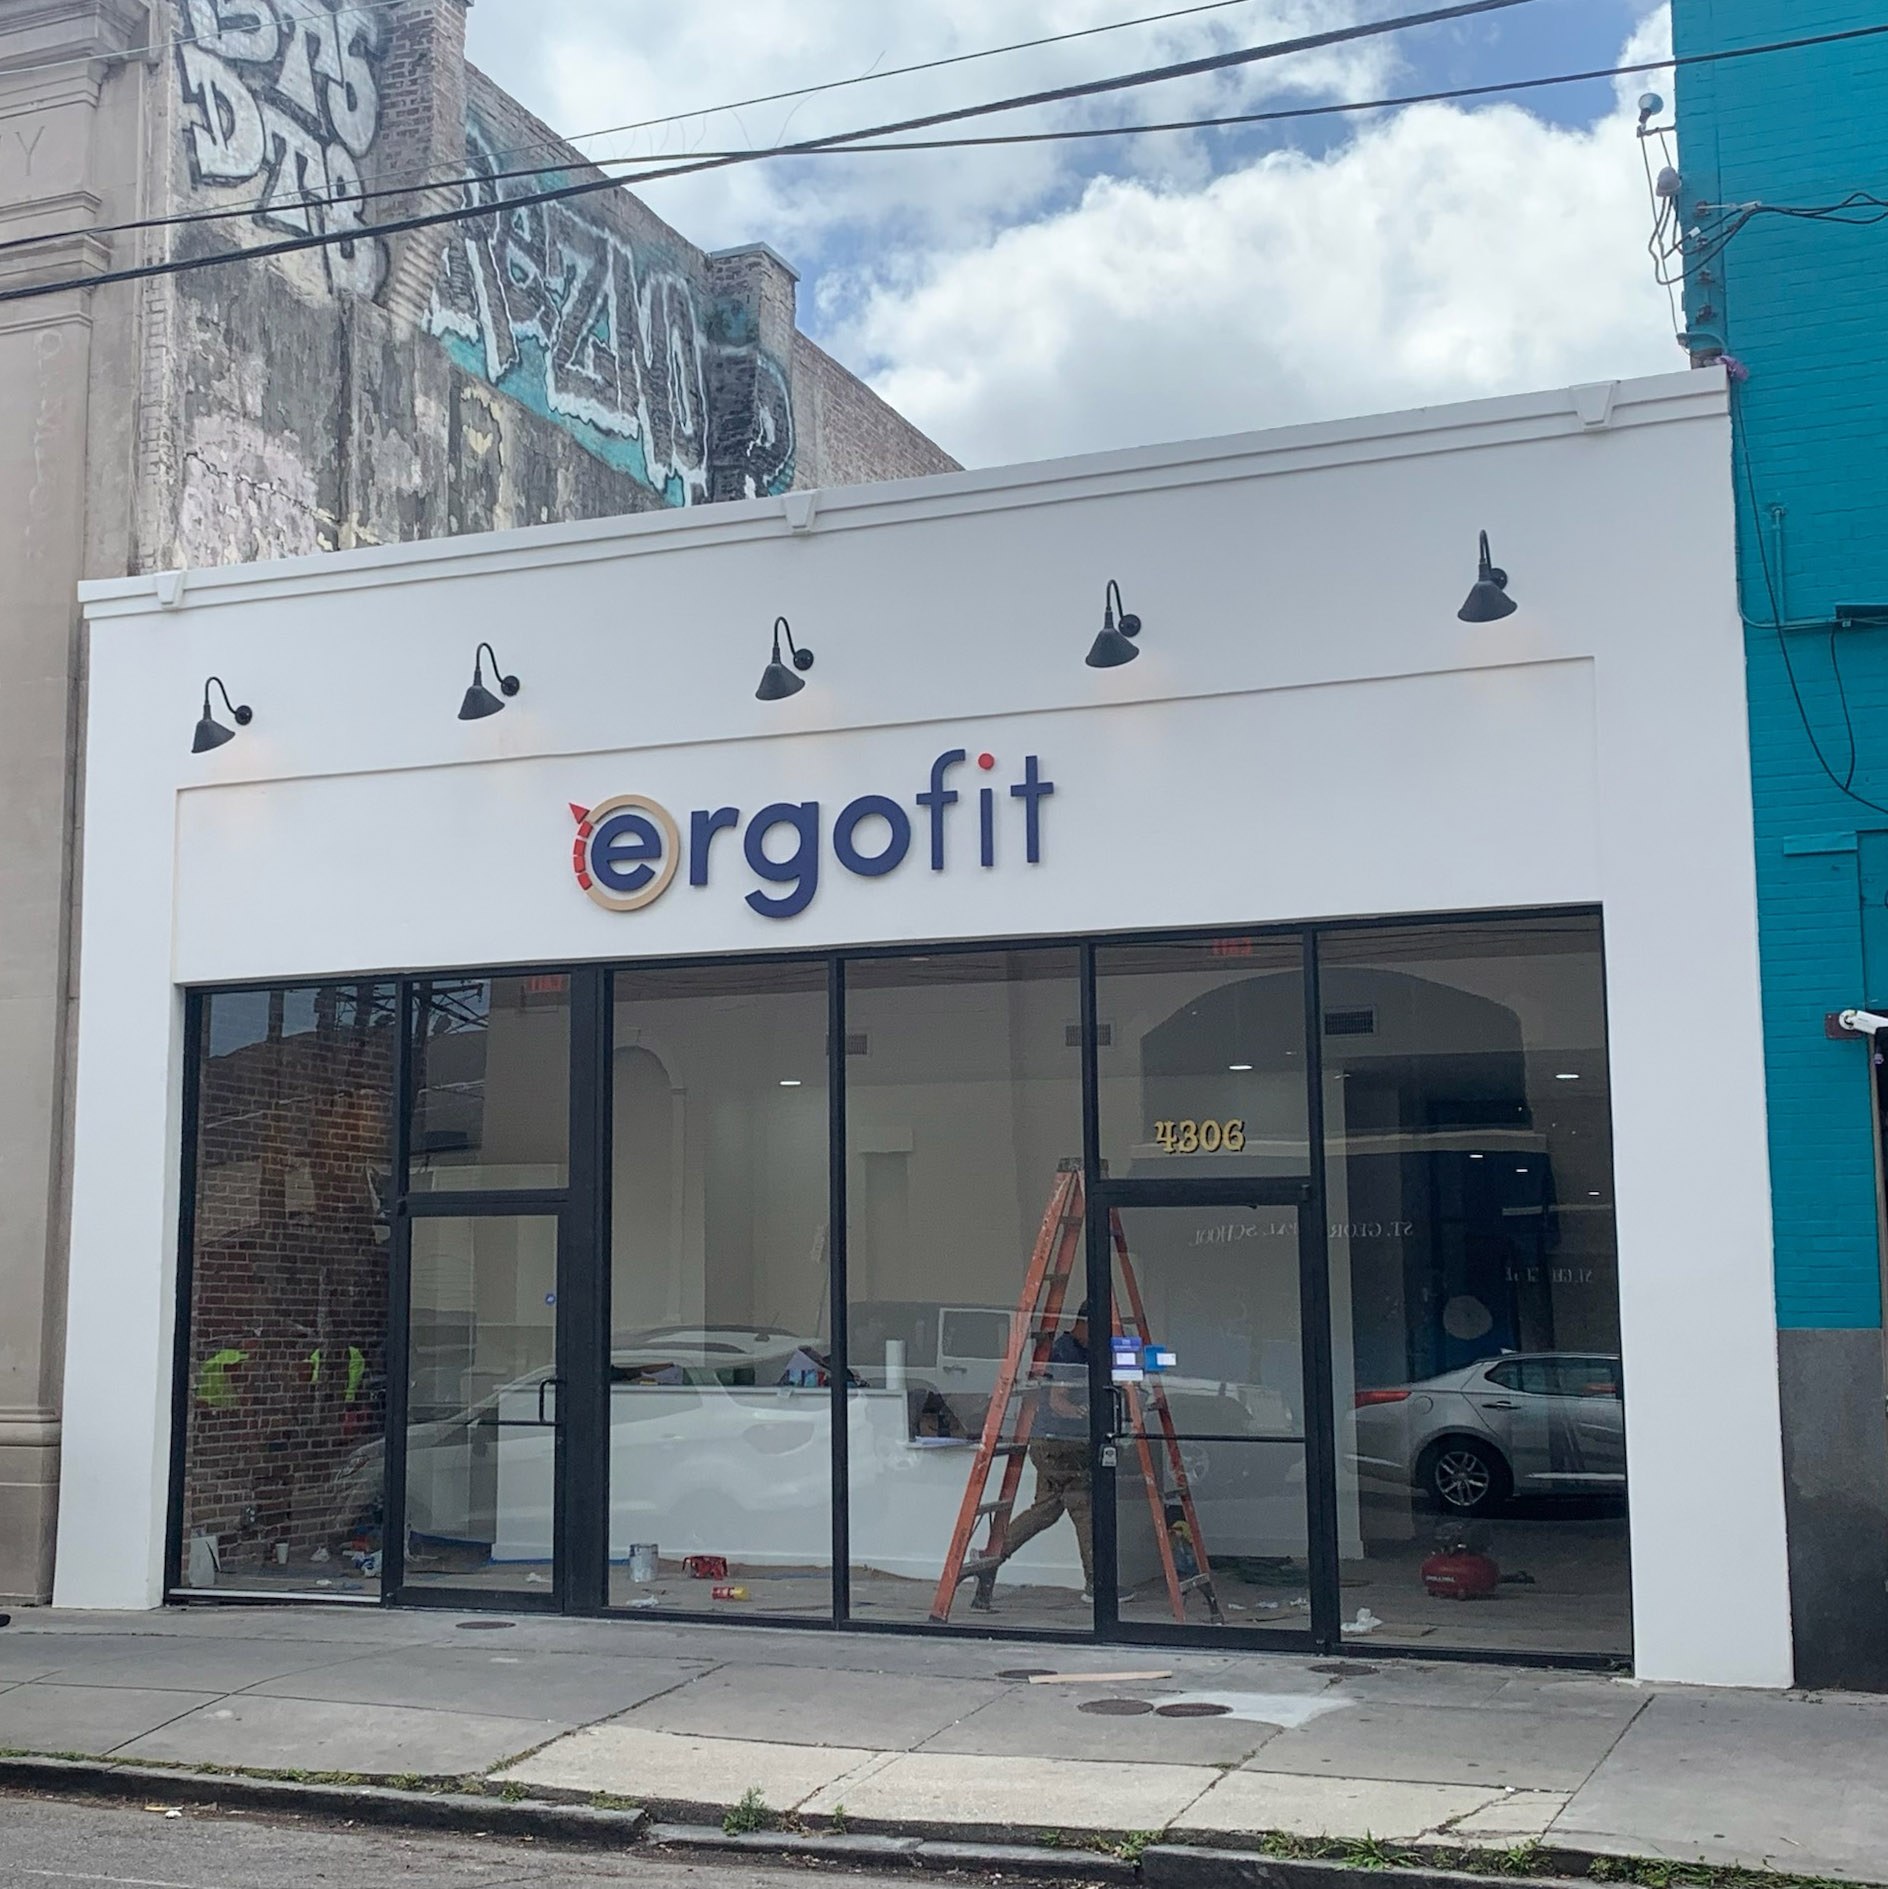 Photo of an exterior facade of one story retail space with the logo saying "ergo fit" above the storefront's large glass windows 